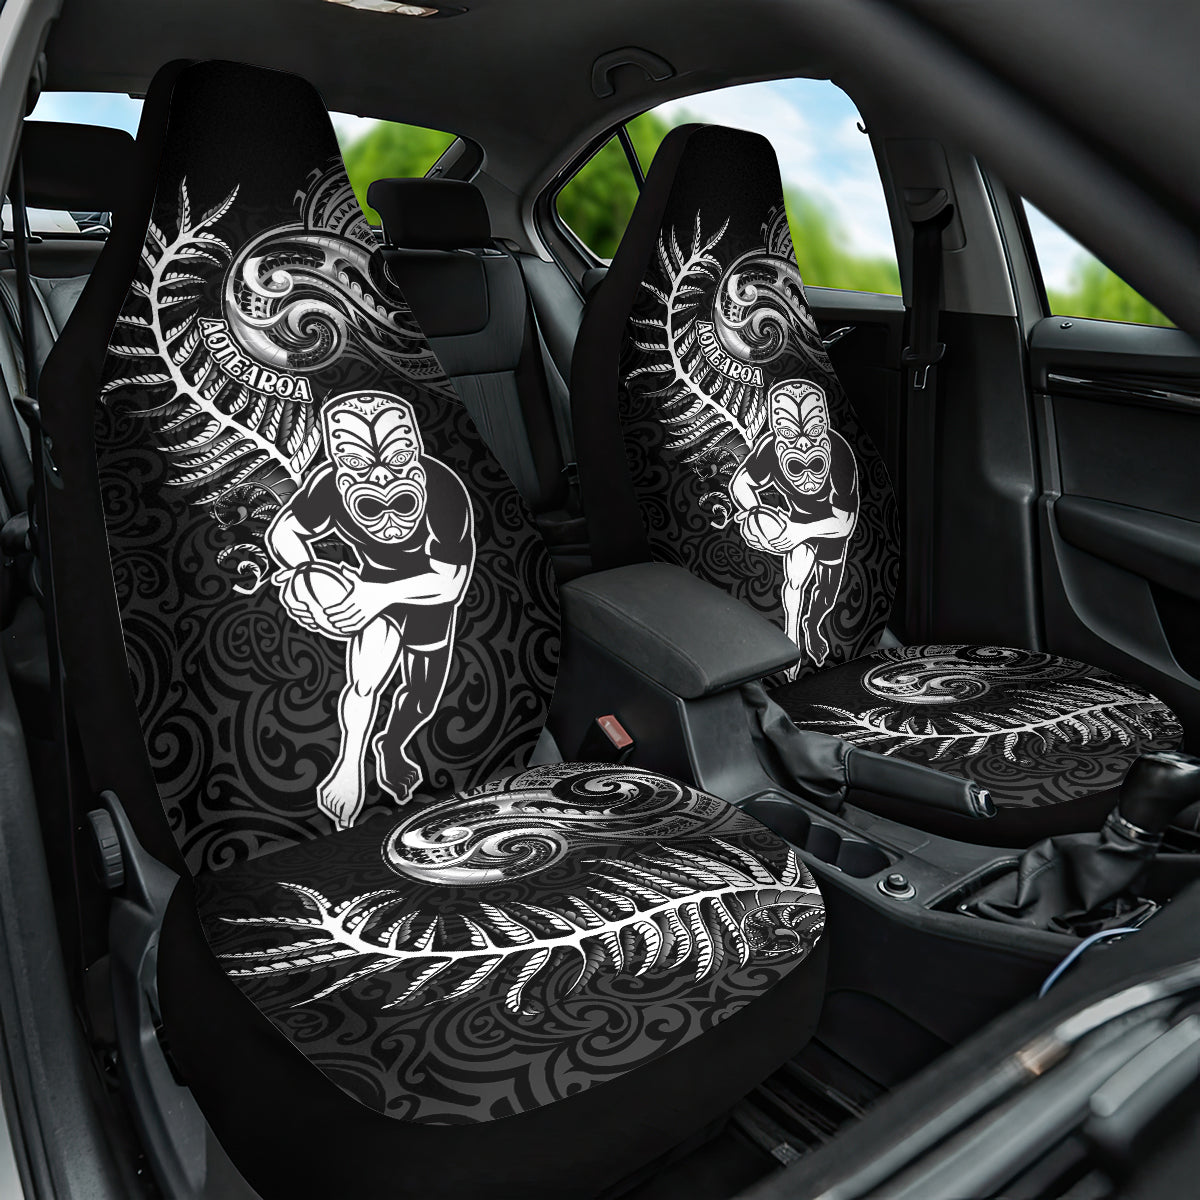 New Zealand Rugby Car Seat Cover Maori Warrior Rugby with Silver Fern Sleeve Tribal Ethnic Style LT03 One Size Black - Polynesian Pride